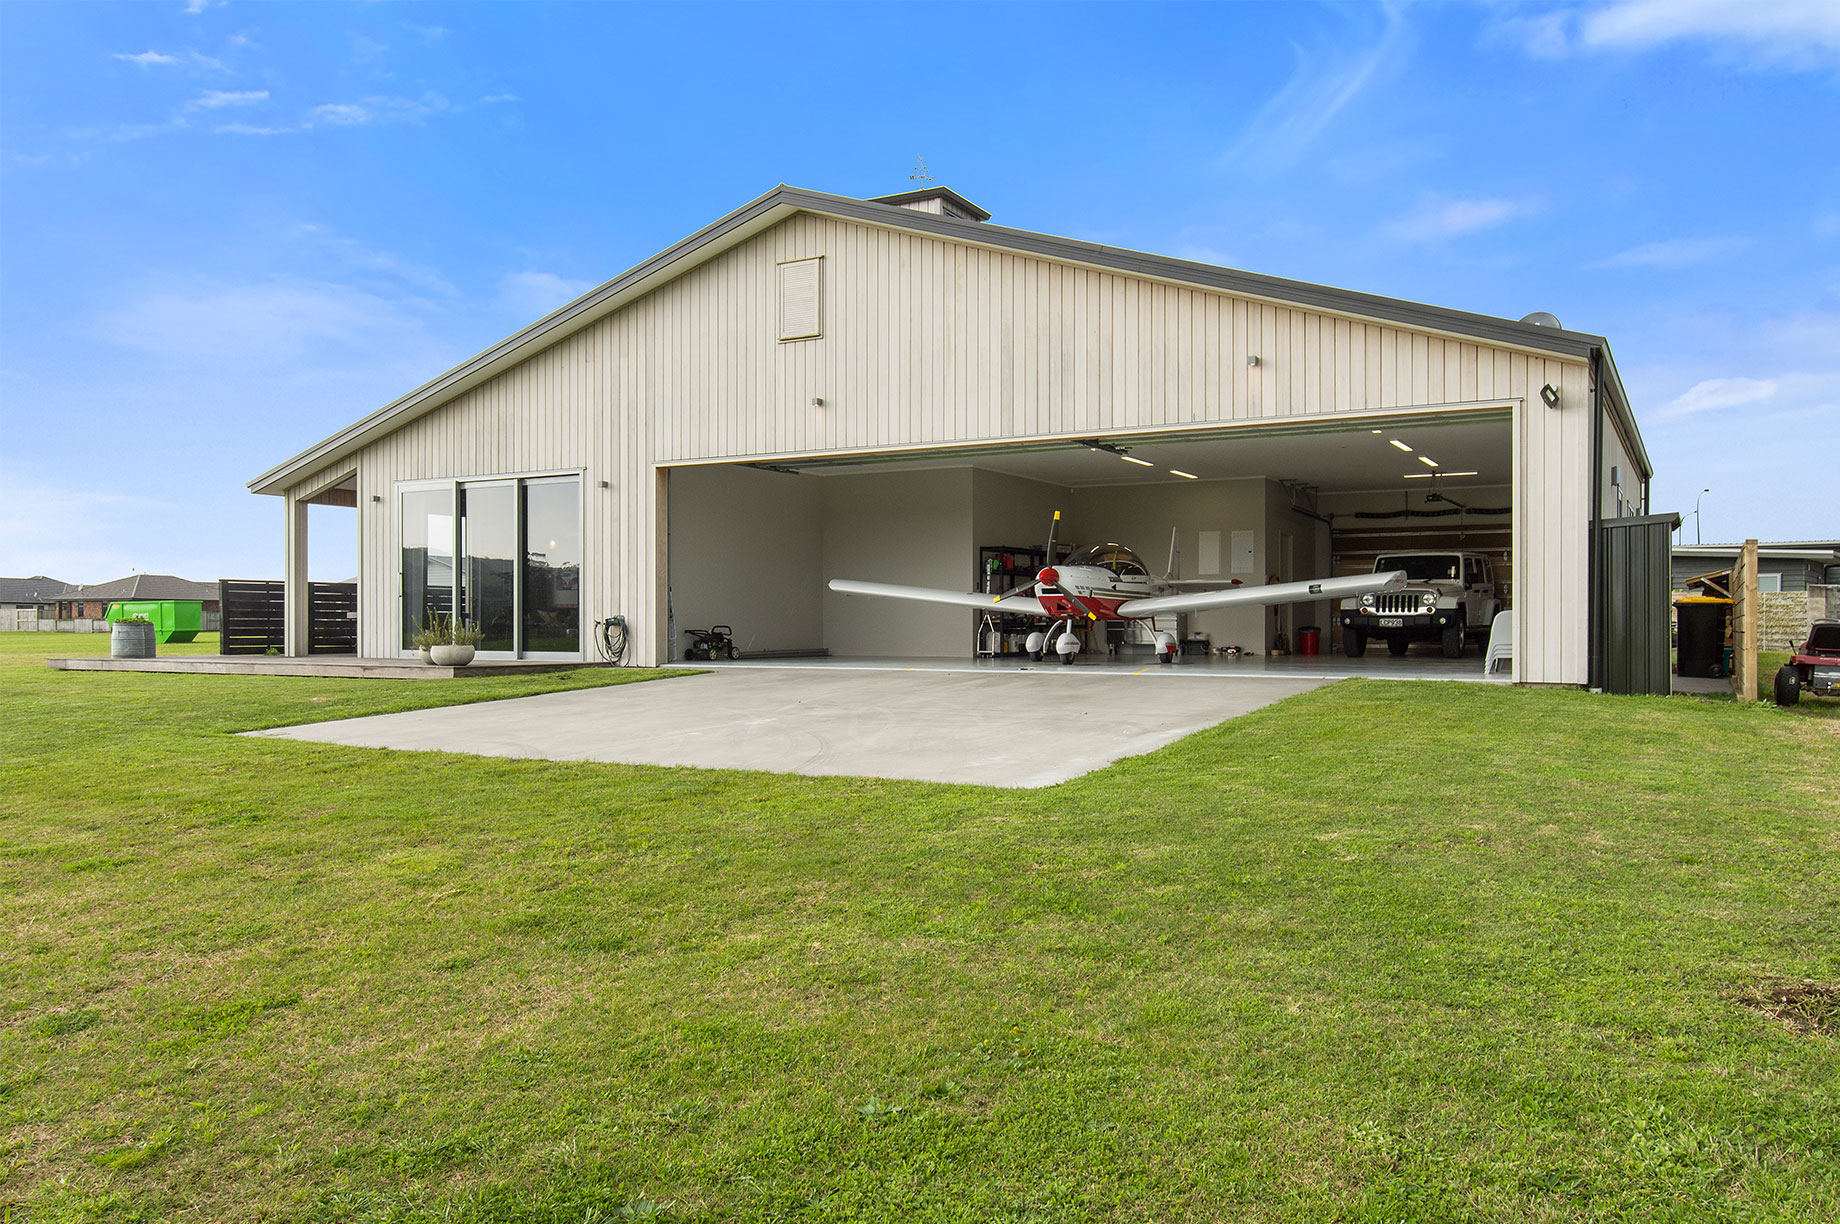 Rural house with an airplane garage